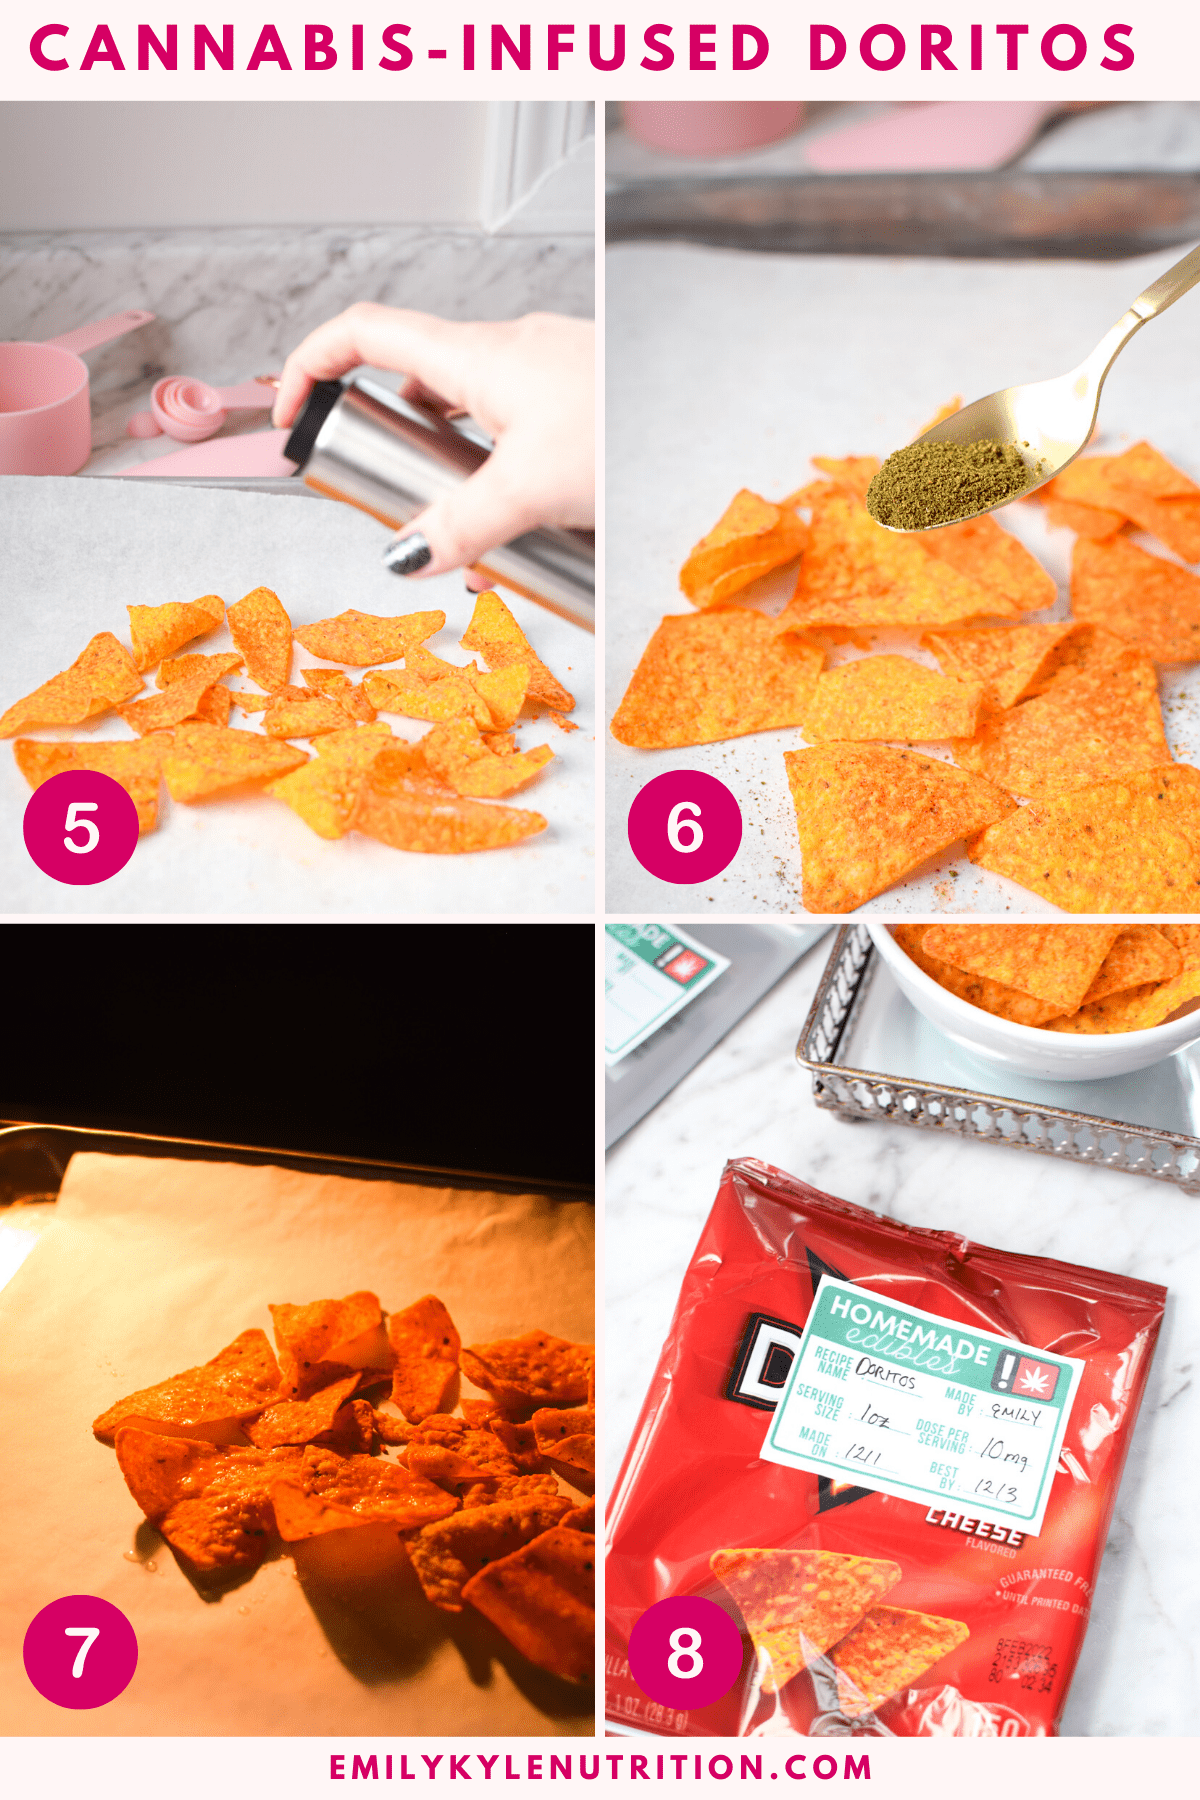 A four step image collage showing how to make cannabis infused Doritos aka doweedos.